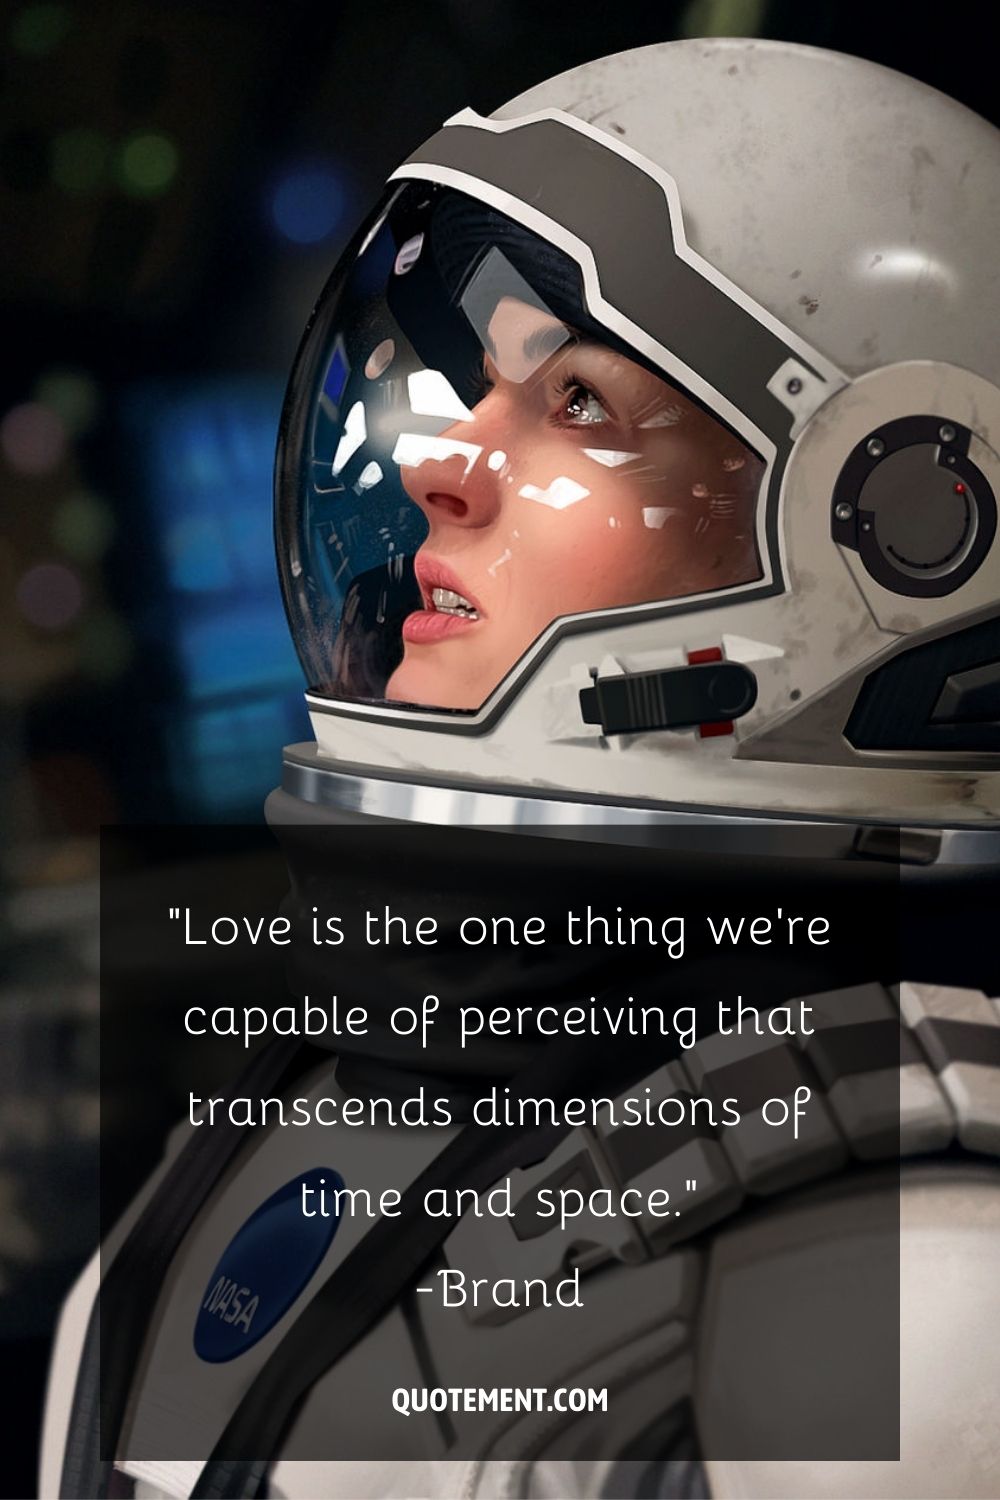 Famous Interstellar quote about love.
